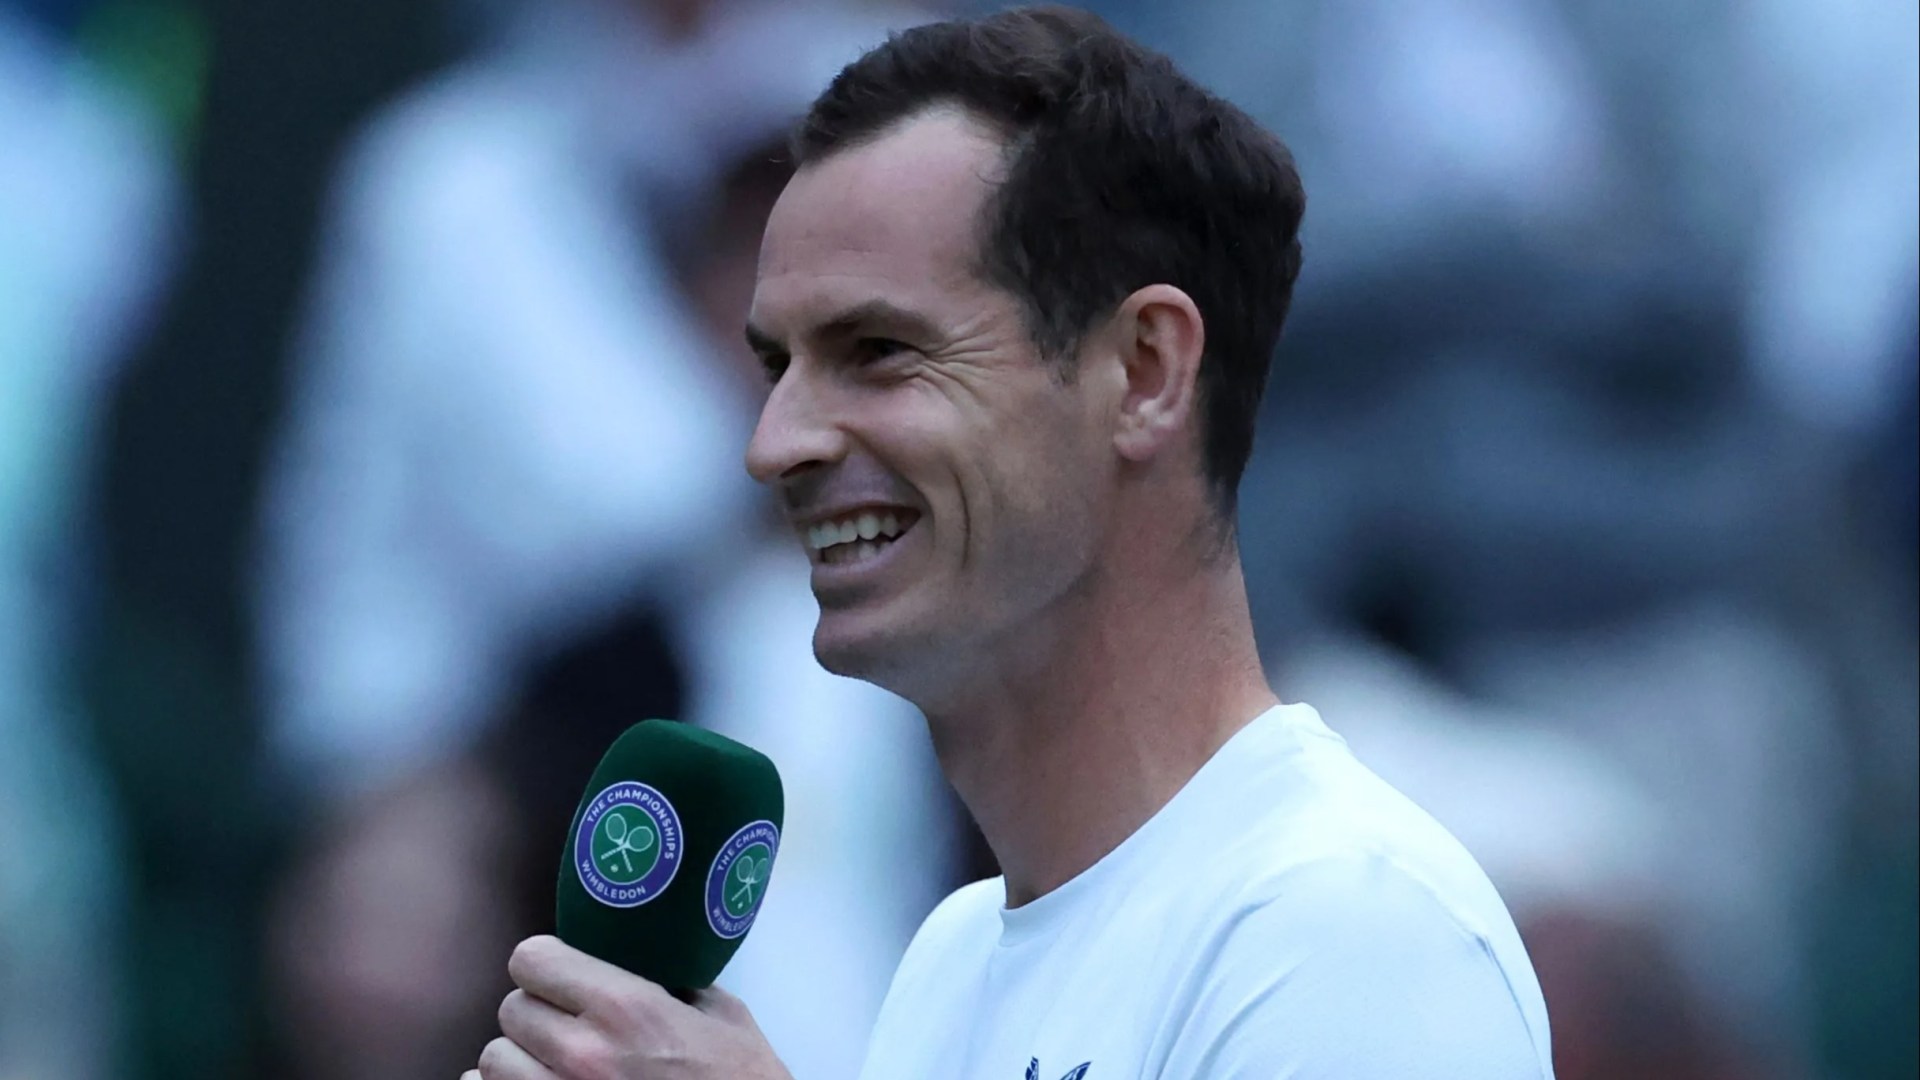 Andy Murray Reveals His Future Plans at Wimbledon: Coaching Over Commentating